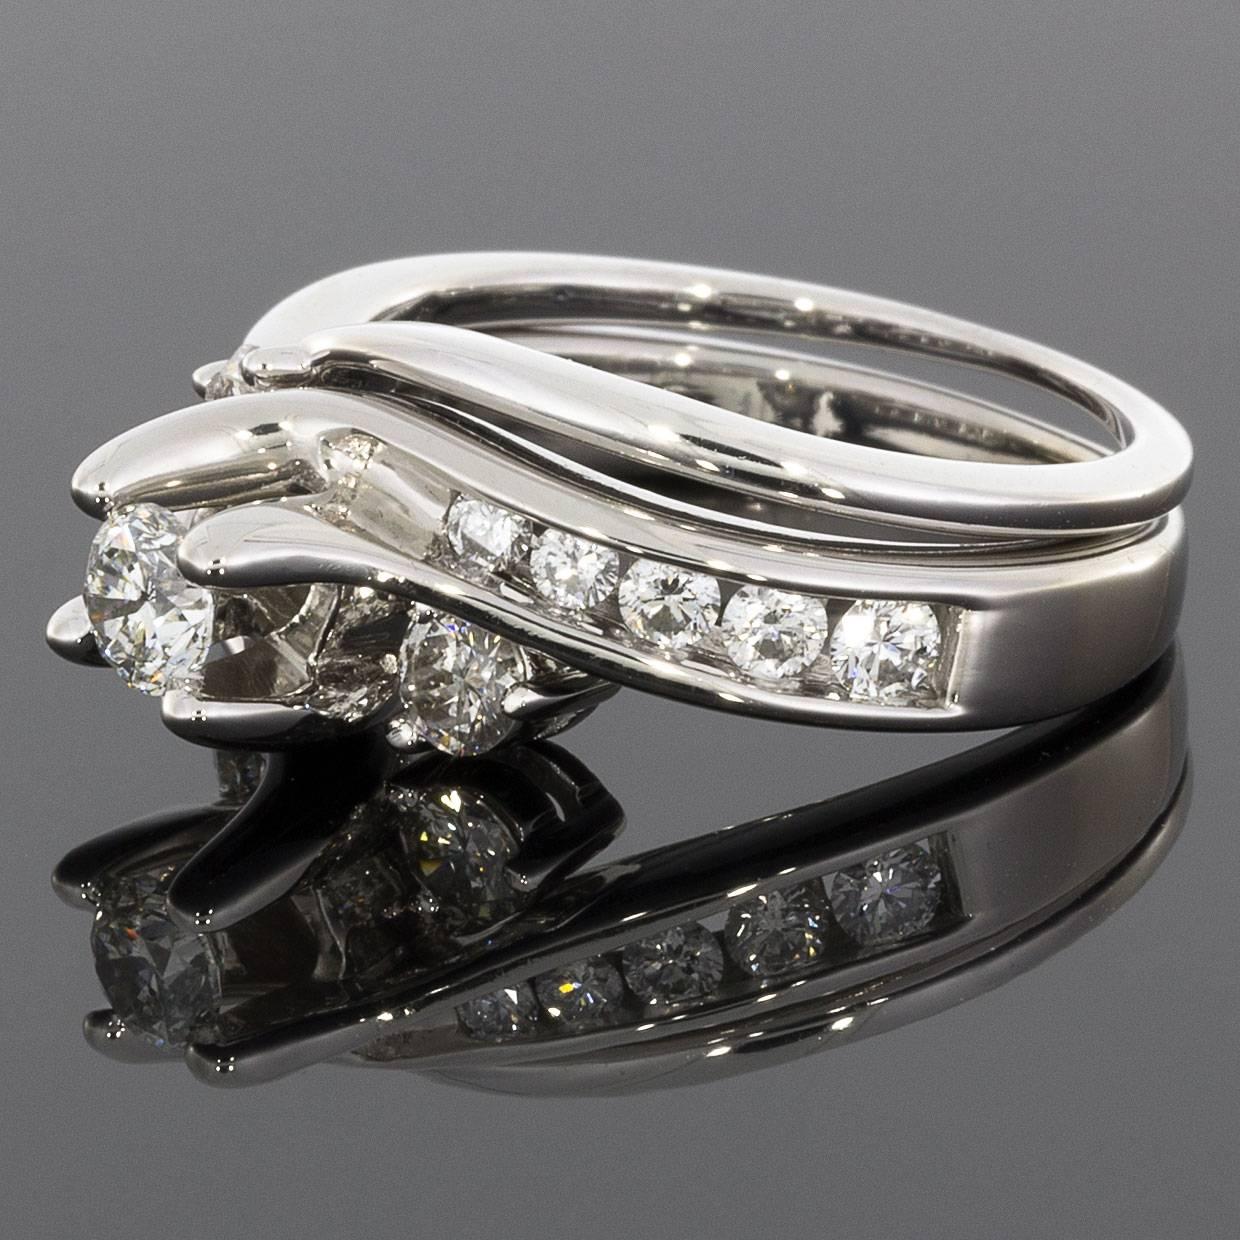 This beautiful engagement ring & wedding band set features a lovely bypass or swirl design in 14 karat white gold. The channel set diamond shoulders of the ring flow gracefully to form the center diamond's prongs. The center diamond is a .25